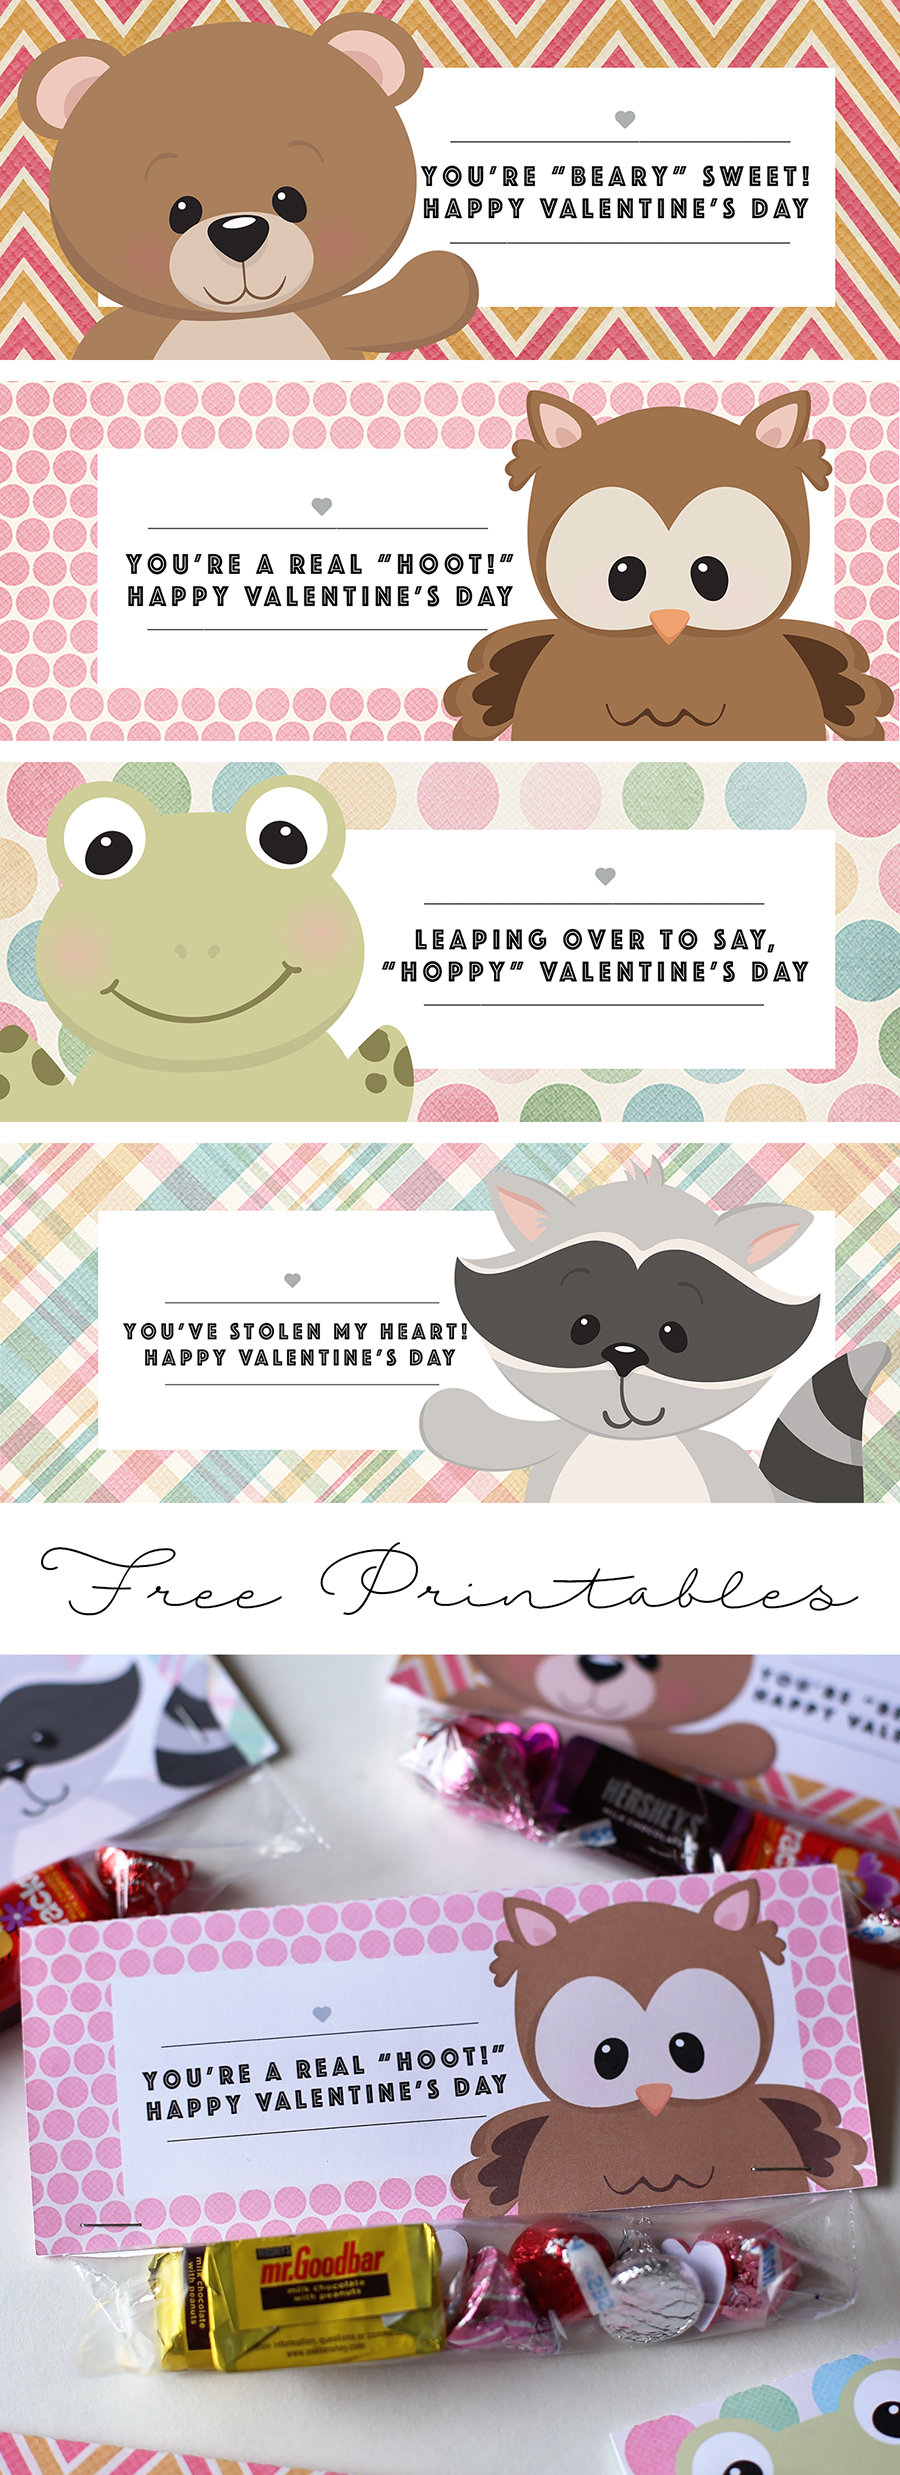 Woodland Animal Friends Valentine's Day Treat Bag Topper | Free Printable